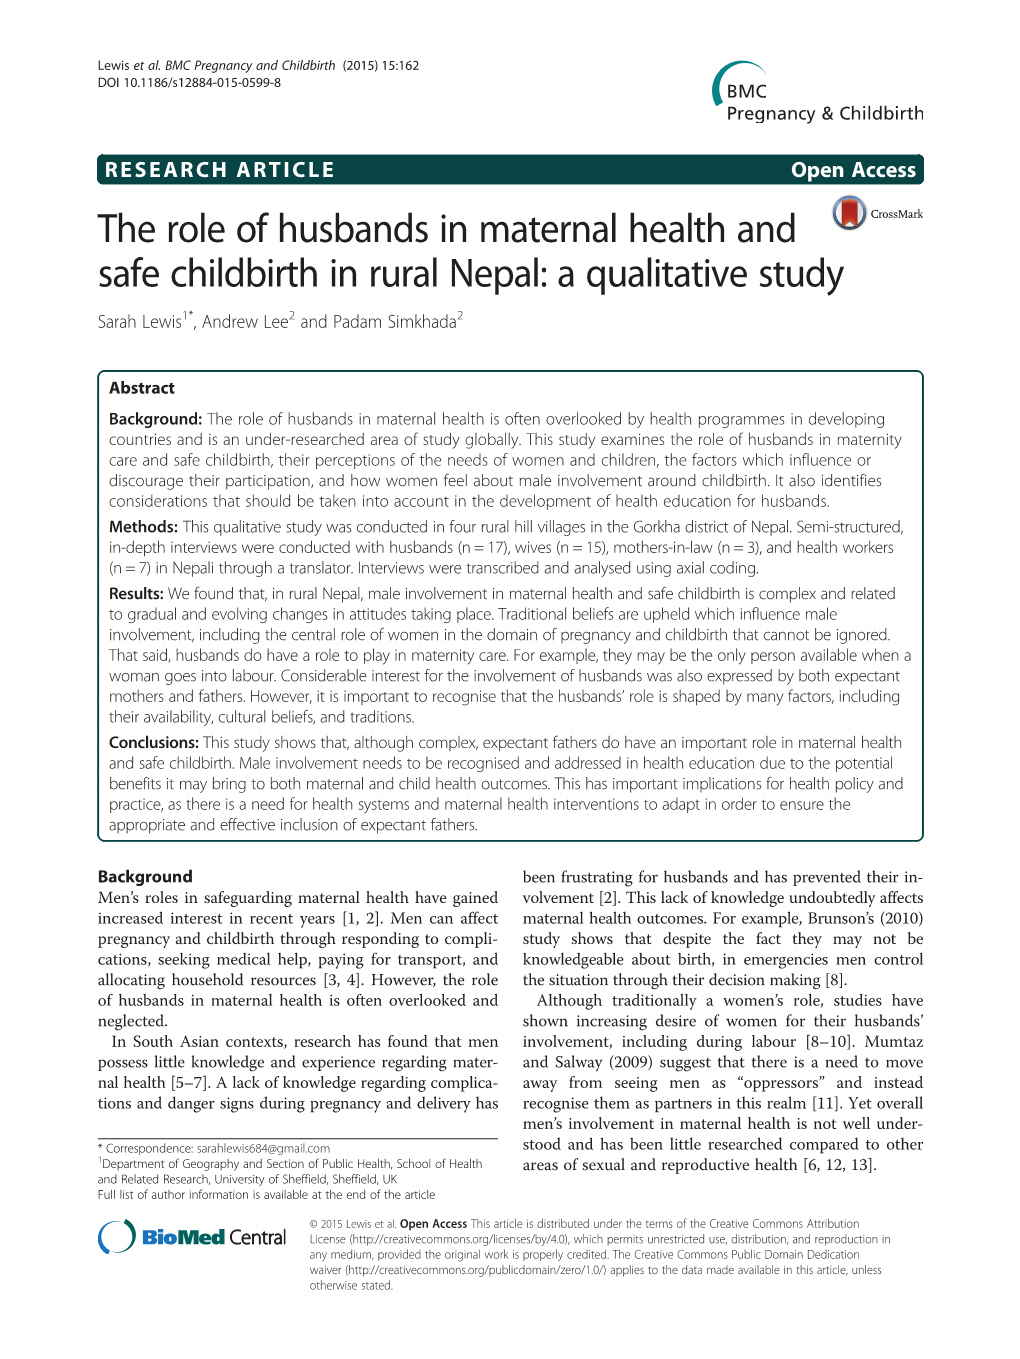 The Role of Husbands in Maternal Health and Safe Childbirth in Rural